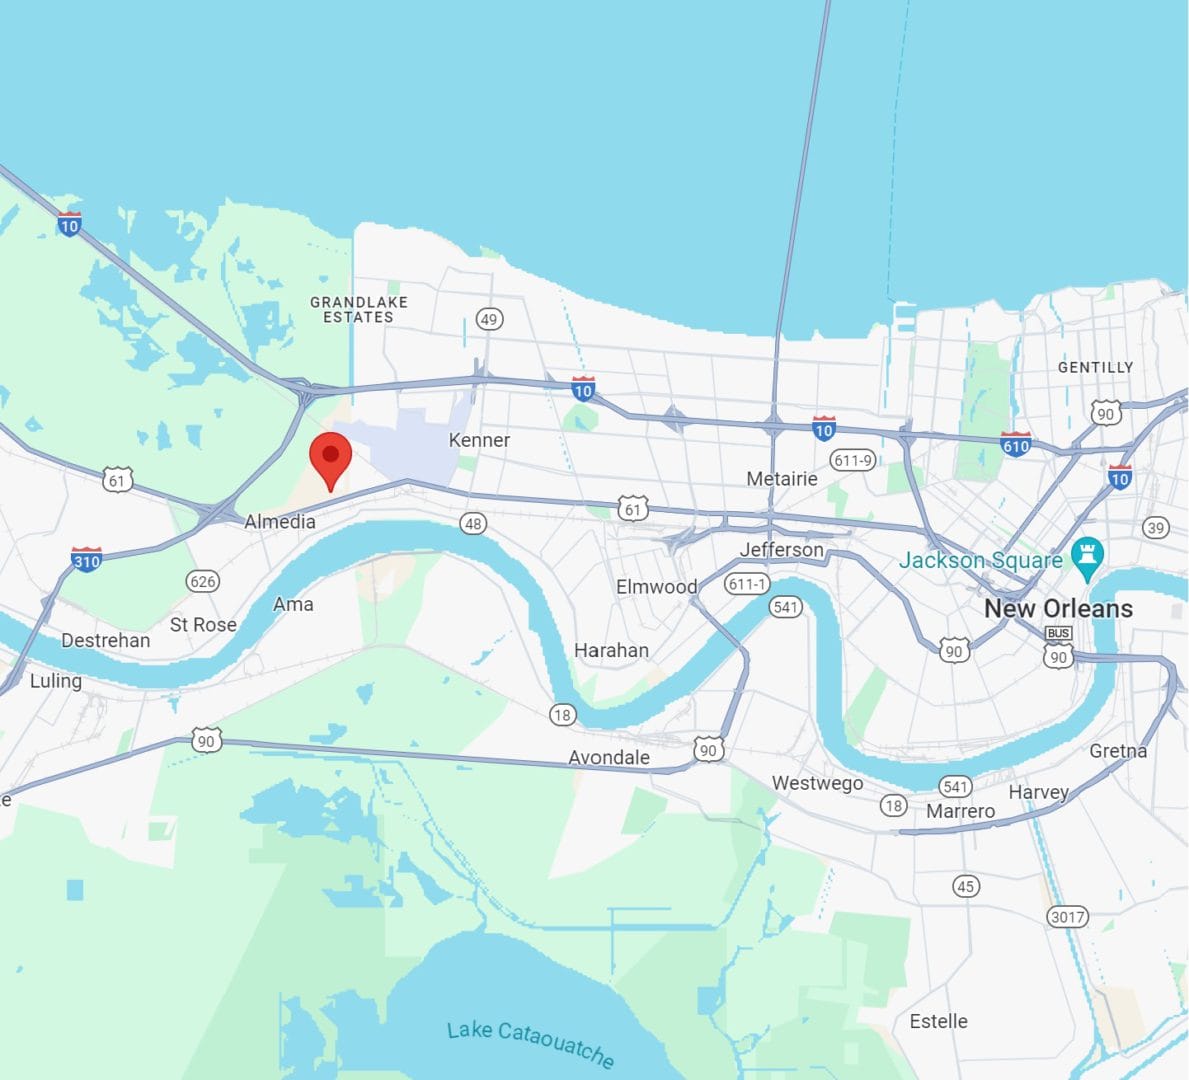 Google map showing the approximate location of Superior Van & Mobility's location in New Orleans, LA.